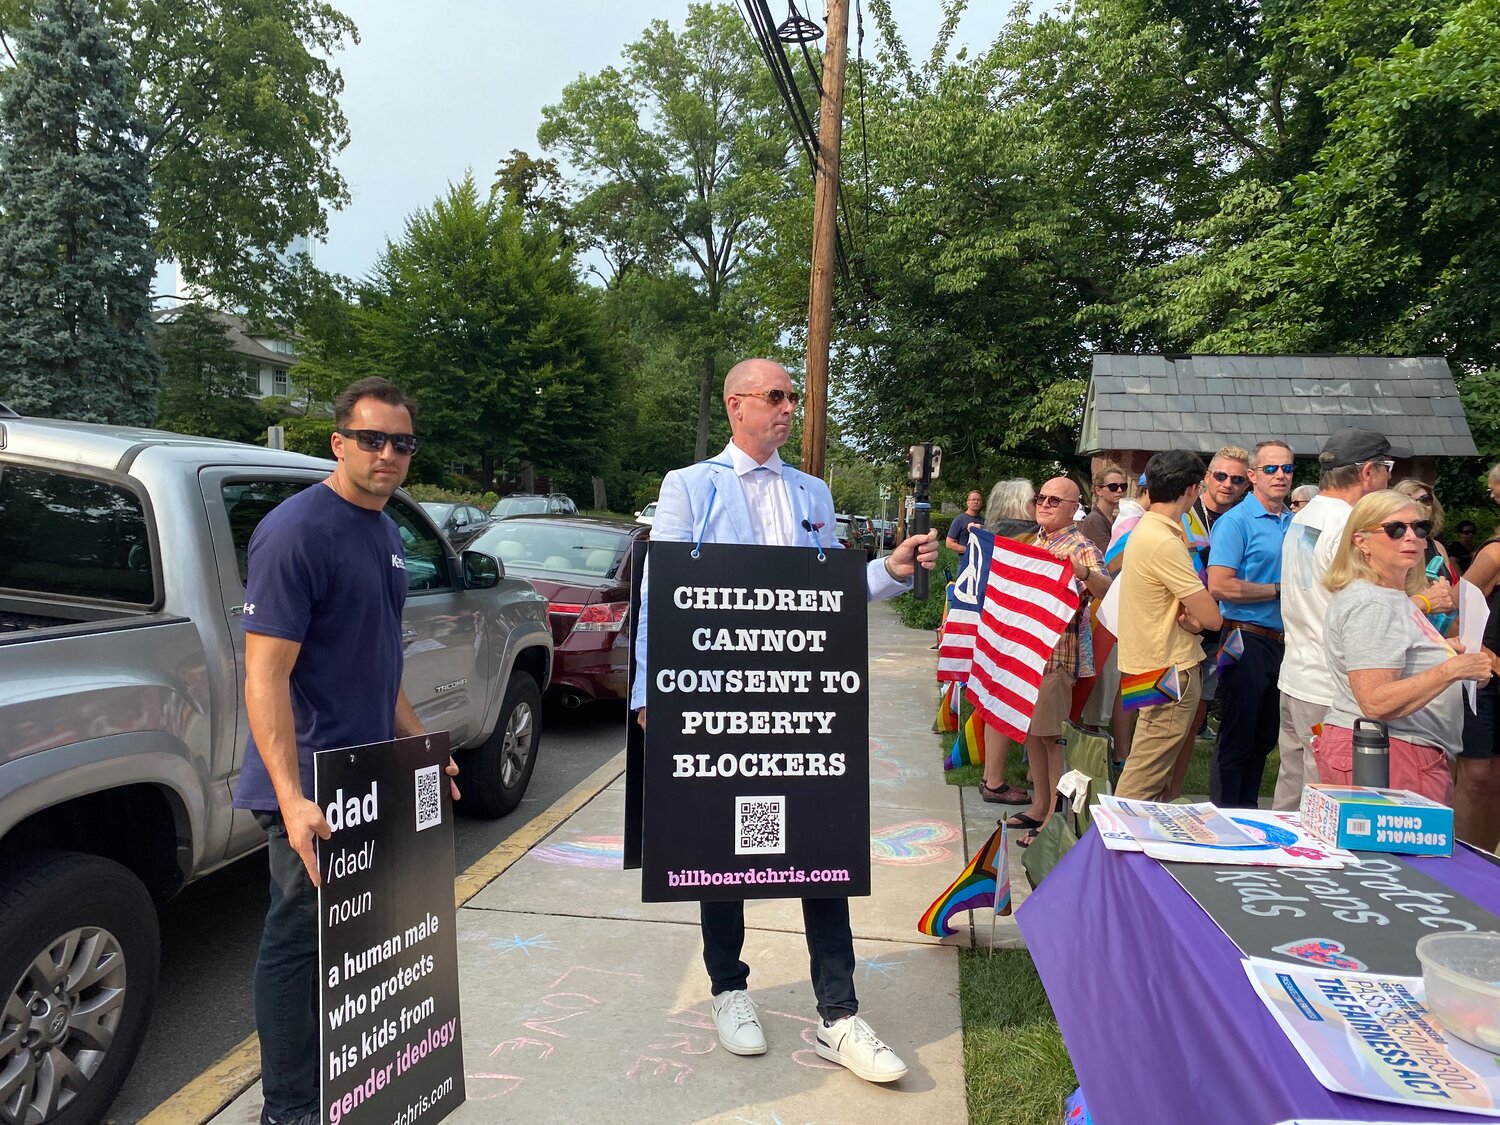 Wearing a sandwich board and holding a recording device, “Billboard Chris” Elston protests “puberty blockers” in front of Salem United Church of Christ in Doylestown, where Rainbow Room meetings are held.